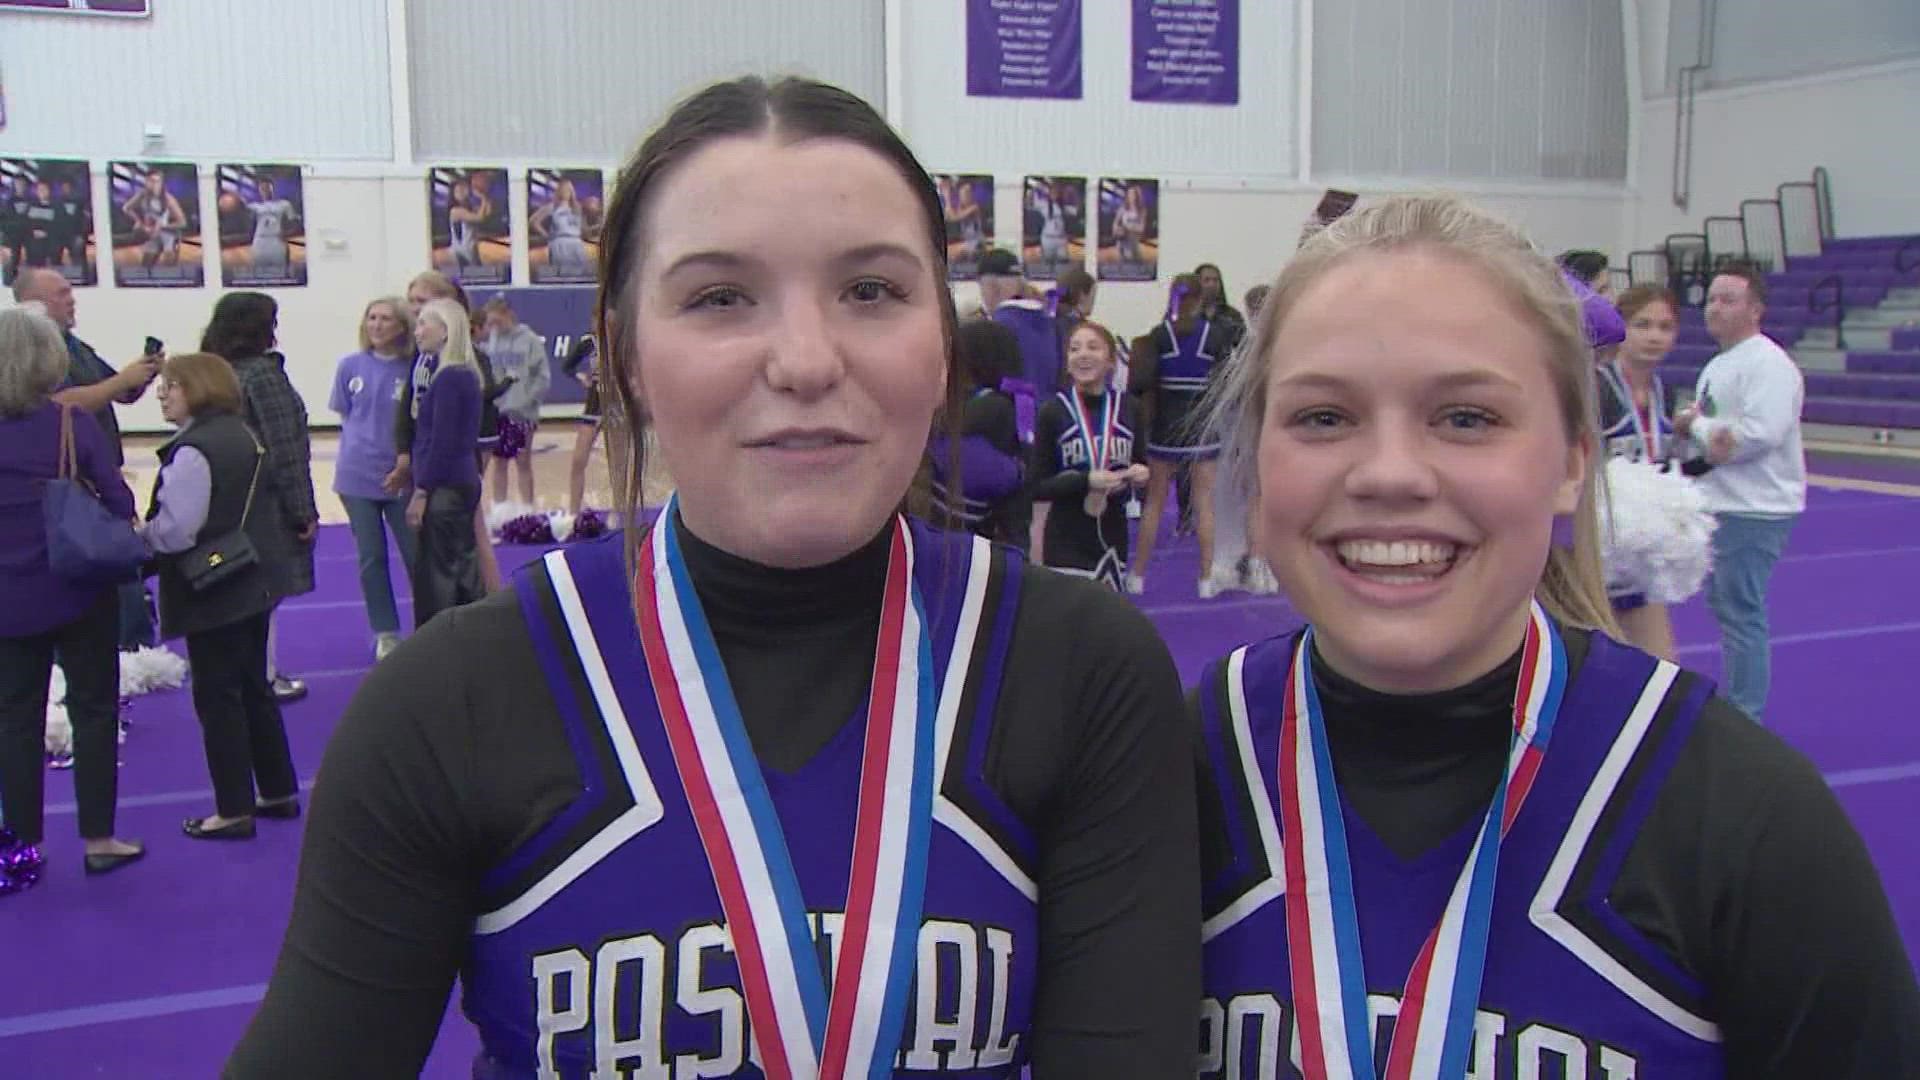 The Paschal High School cheerleaders prepared year-round and even took part in 4-hour practices in the days leading up to the competition.